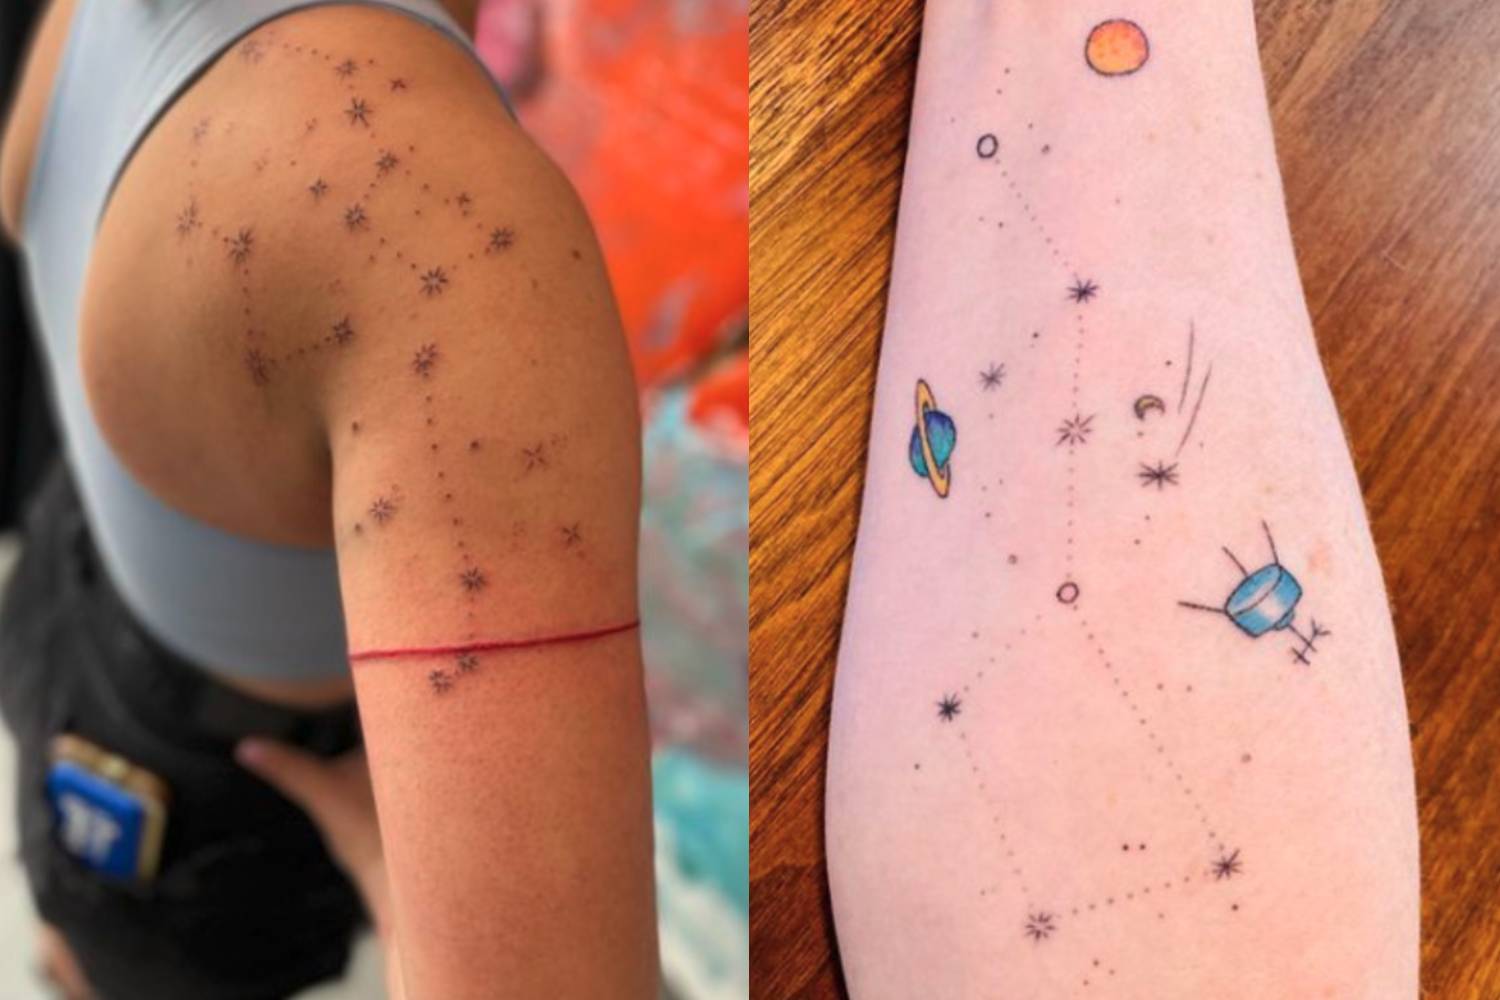 Arm Tattoo with Constellation of Stars - wide 4